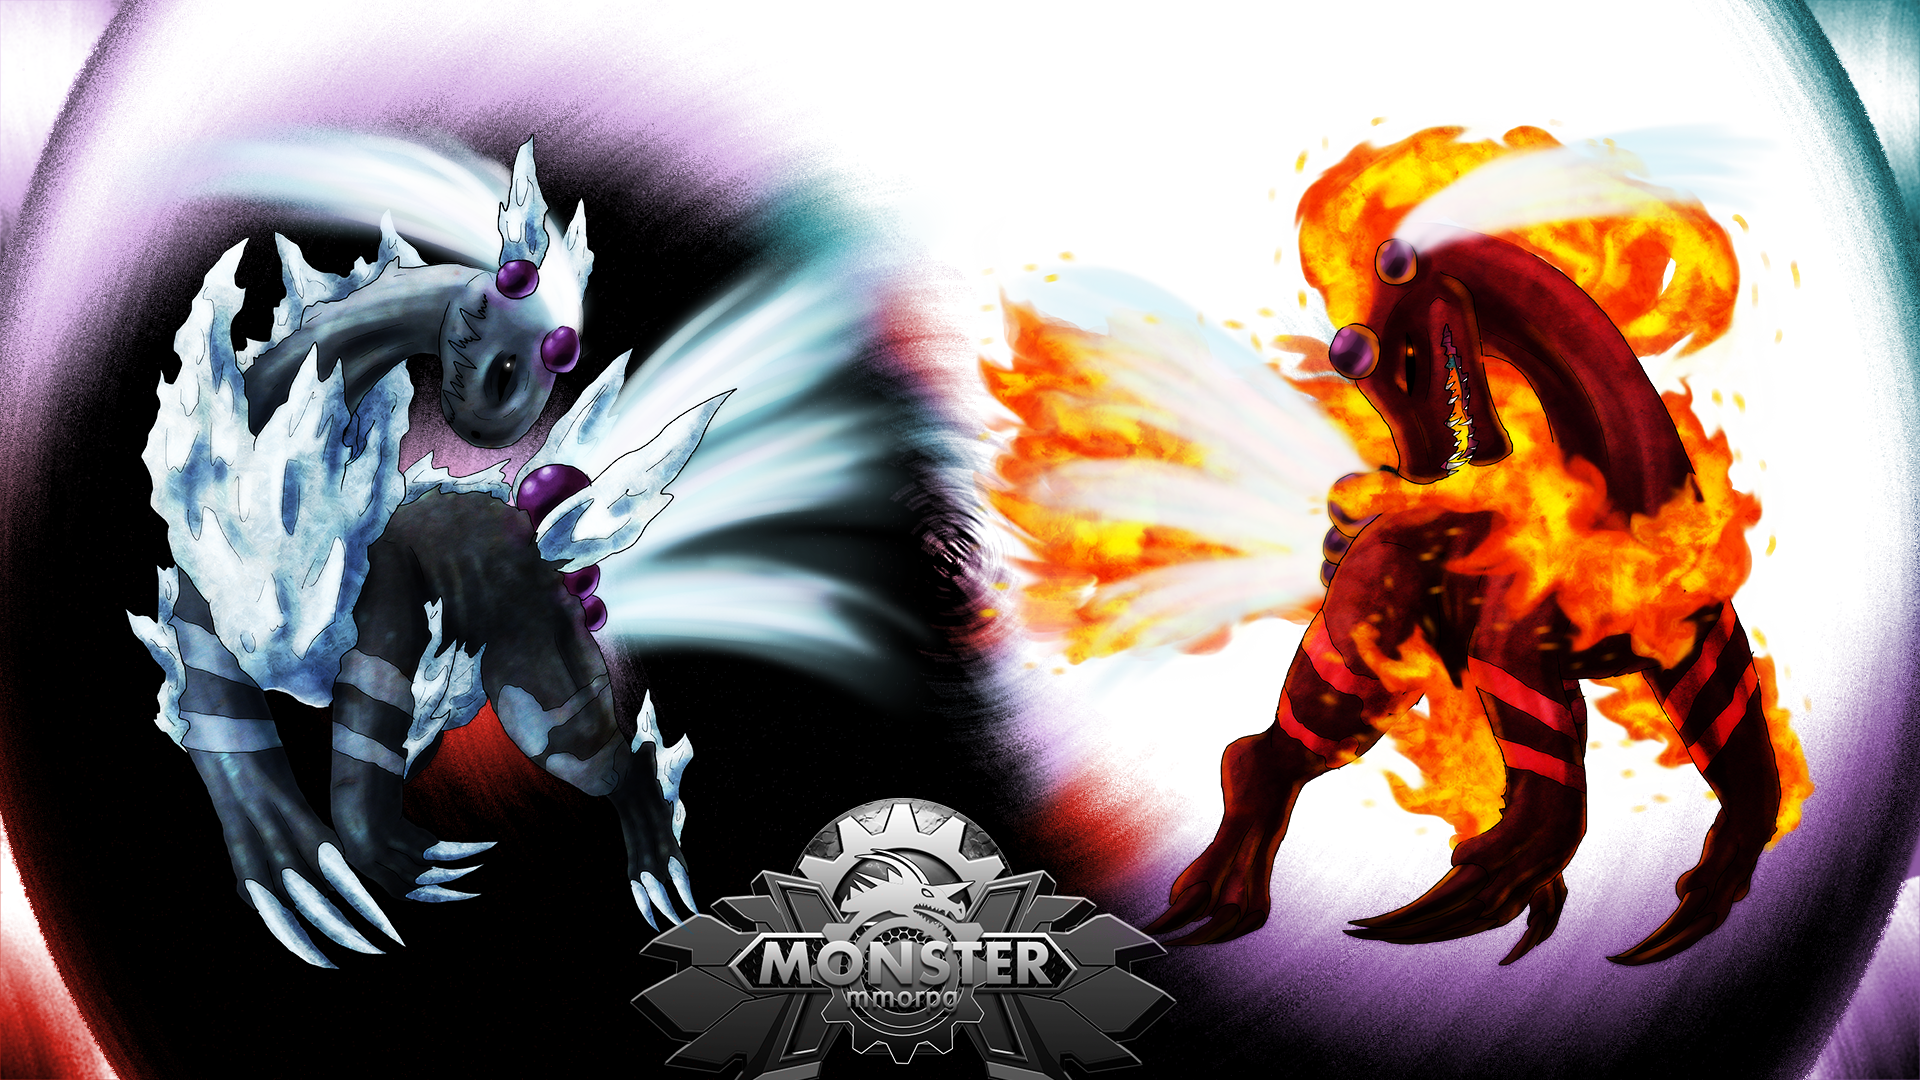 Free-Awesome-Computer-Game-Monster-MMO-RPG-Wallpaper.png